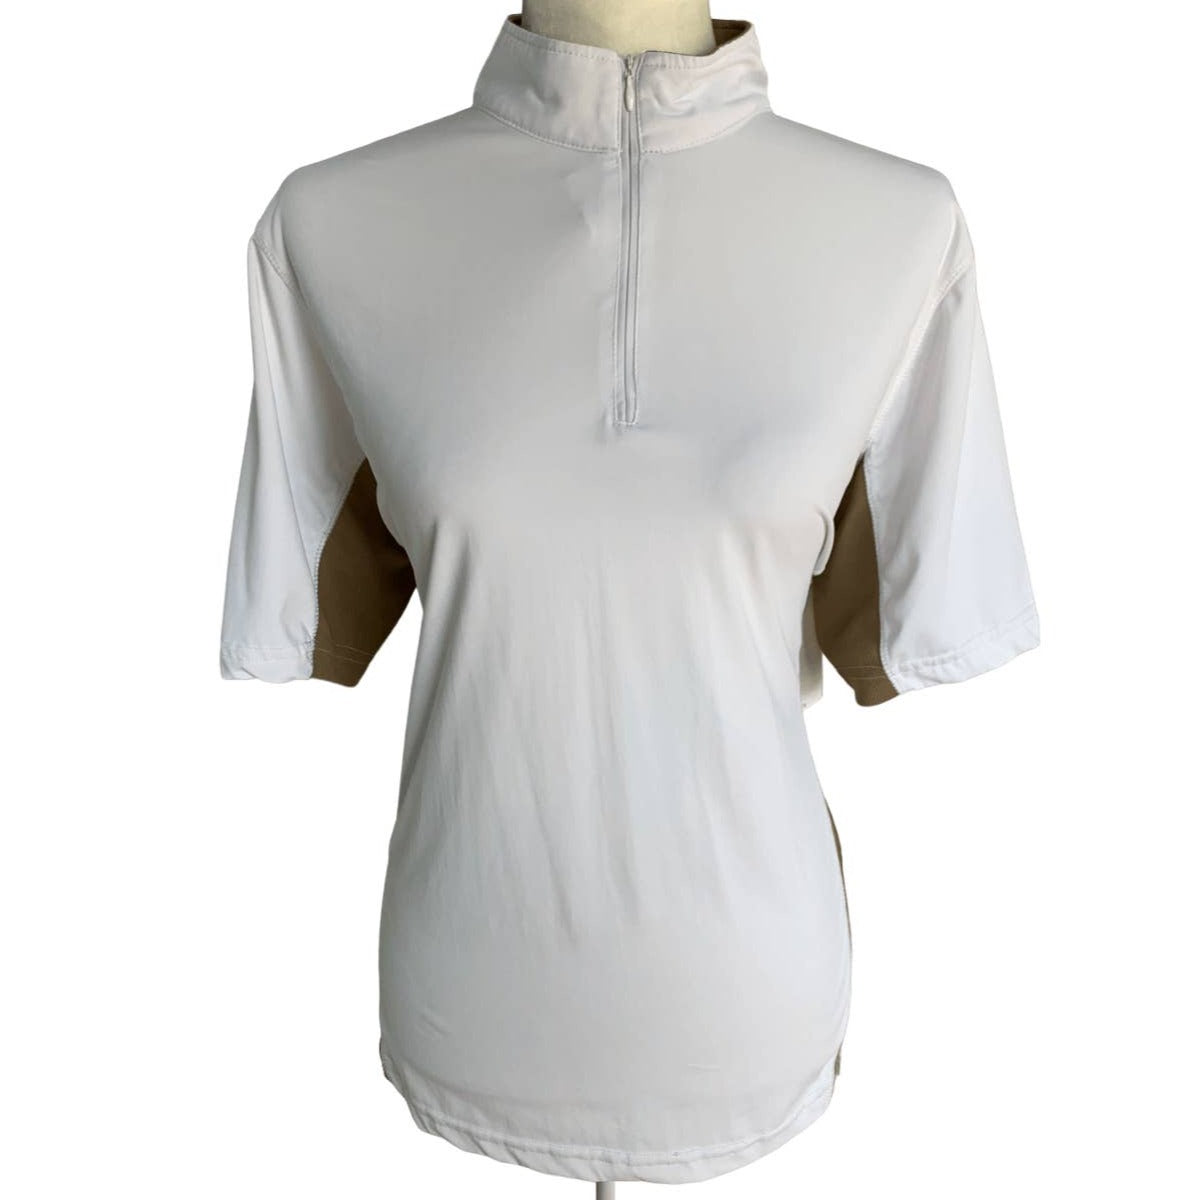 Equine Couture Sportif Riding Shirt in White / Tan - Woman's X-Large